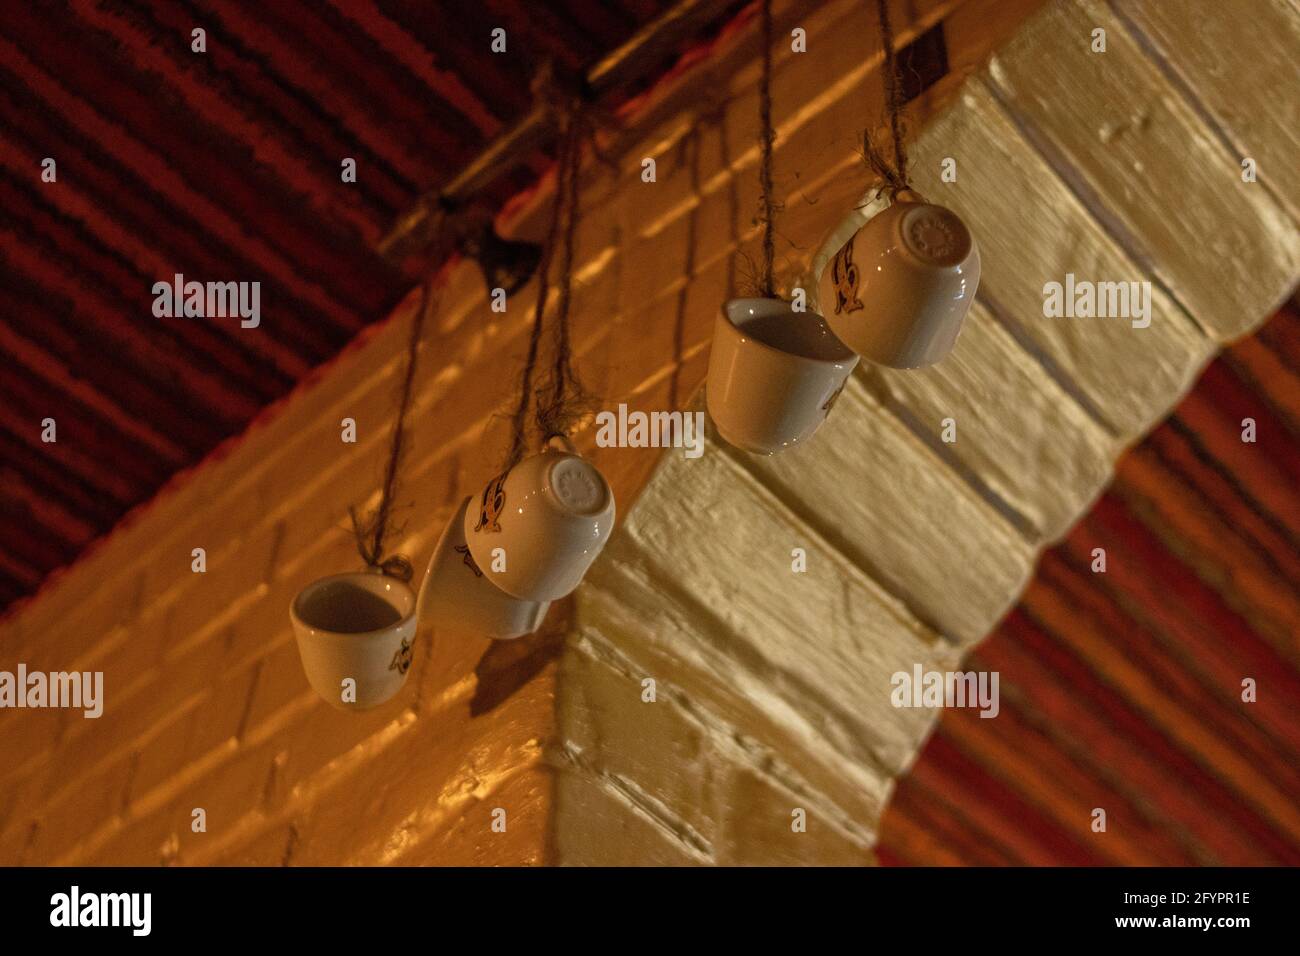 Old mugs on hangers hanging on the chandelier in a room Stock Photo